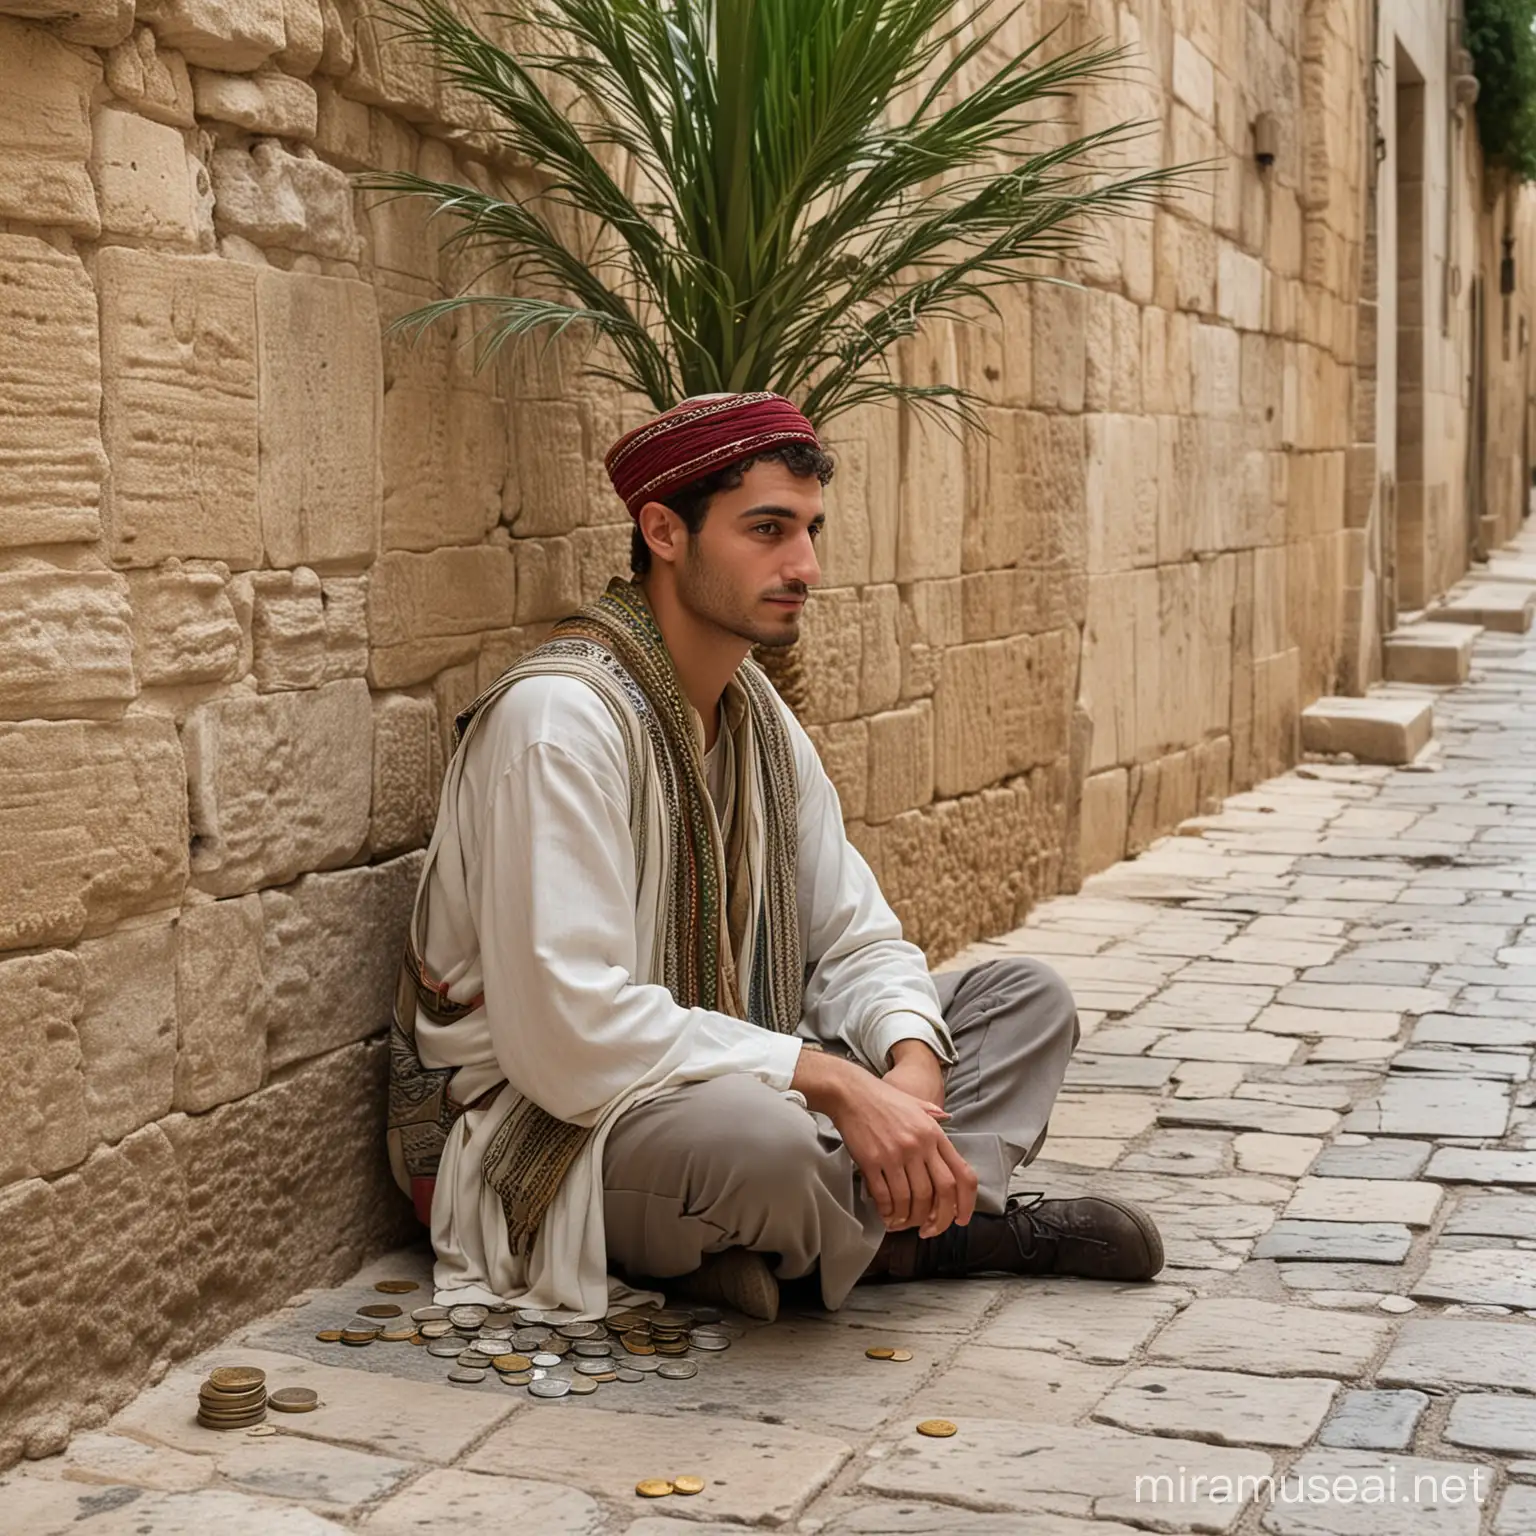 real palm tree fronds on ancient roads,  a down trodden young man sitting, wearing middle eastern garments, holding a small bag of silver coins, no cars, Jerusalem streets